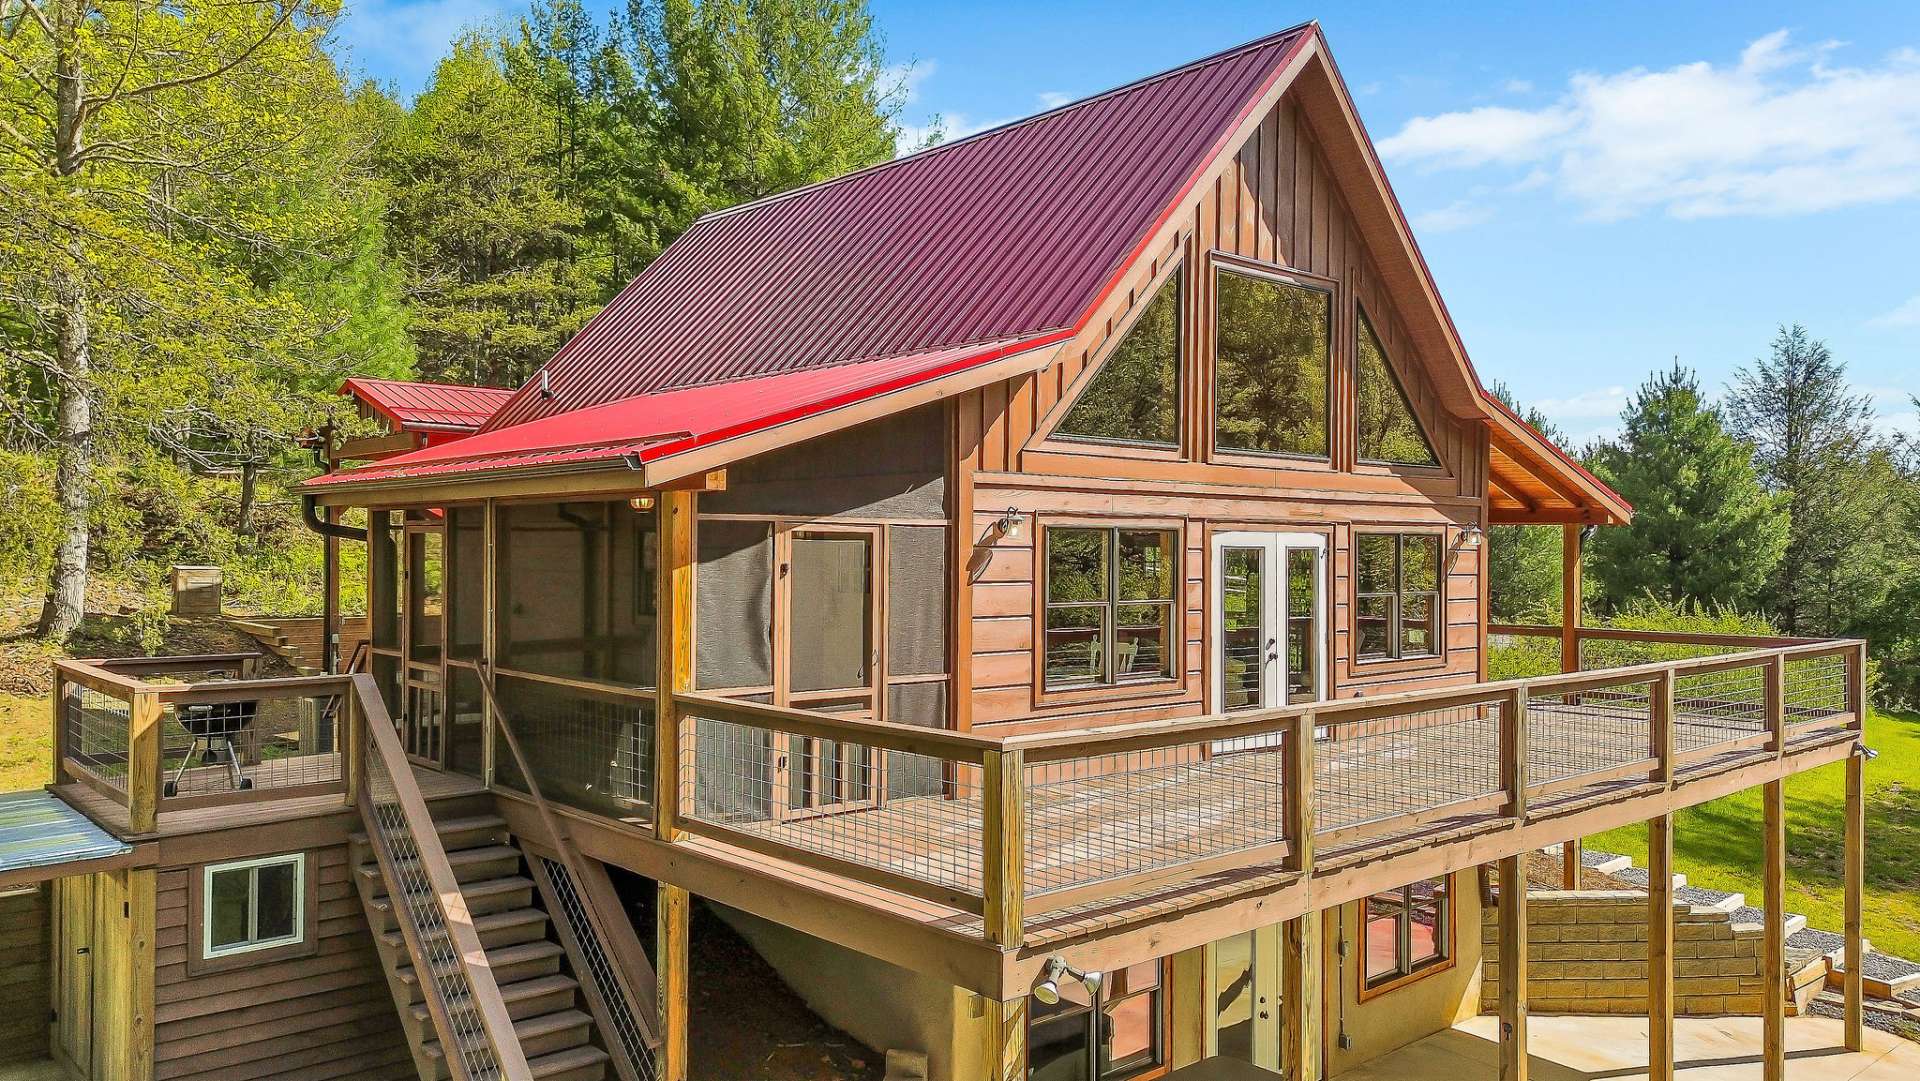 This cabin's expansive deck spaces offers the ultimate sanctuary for relaxation or entertaining.